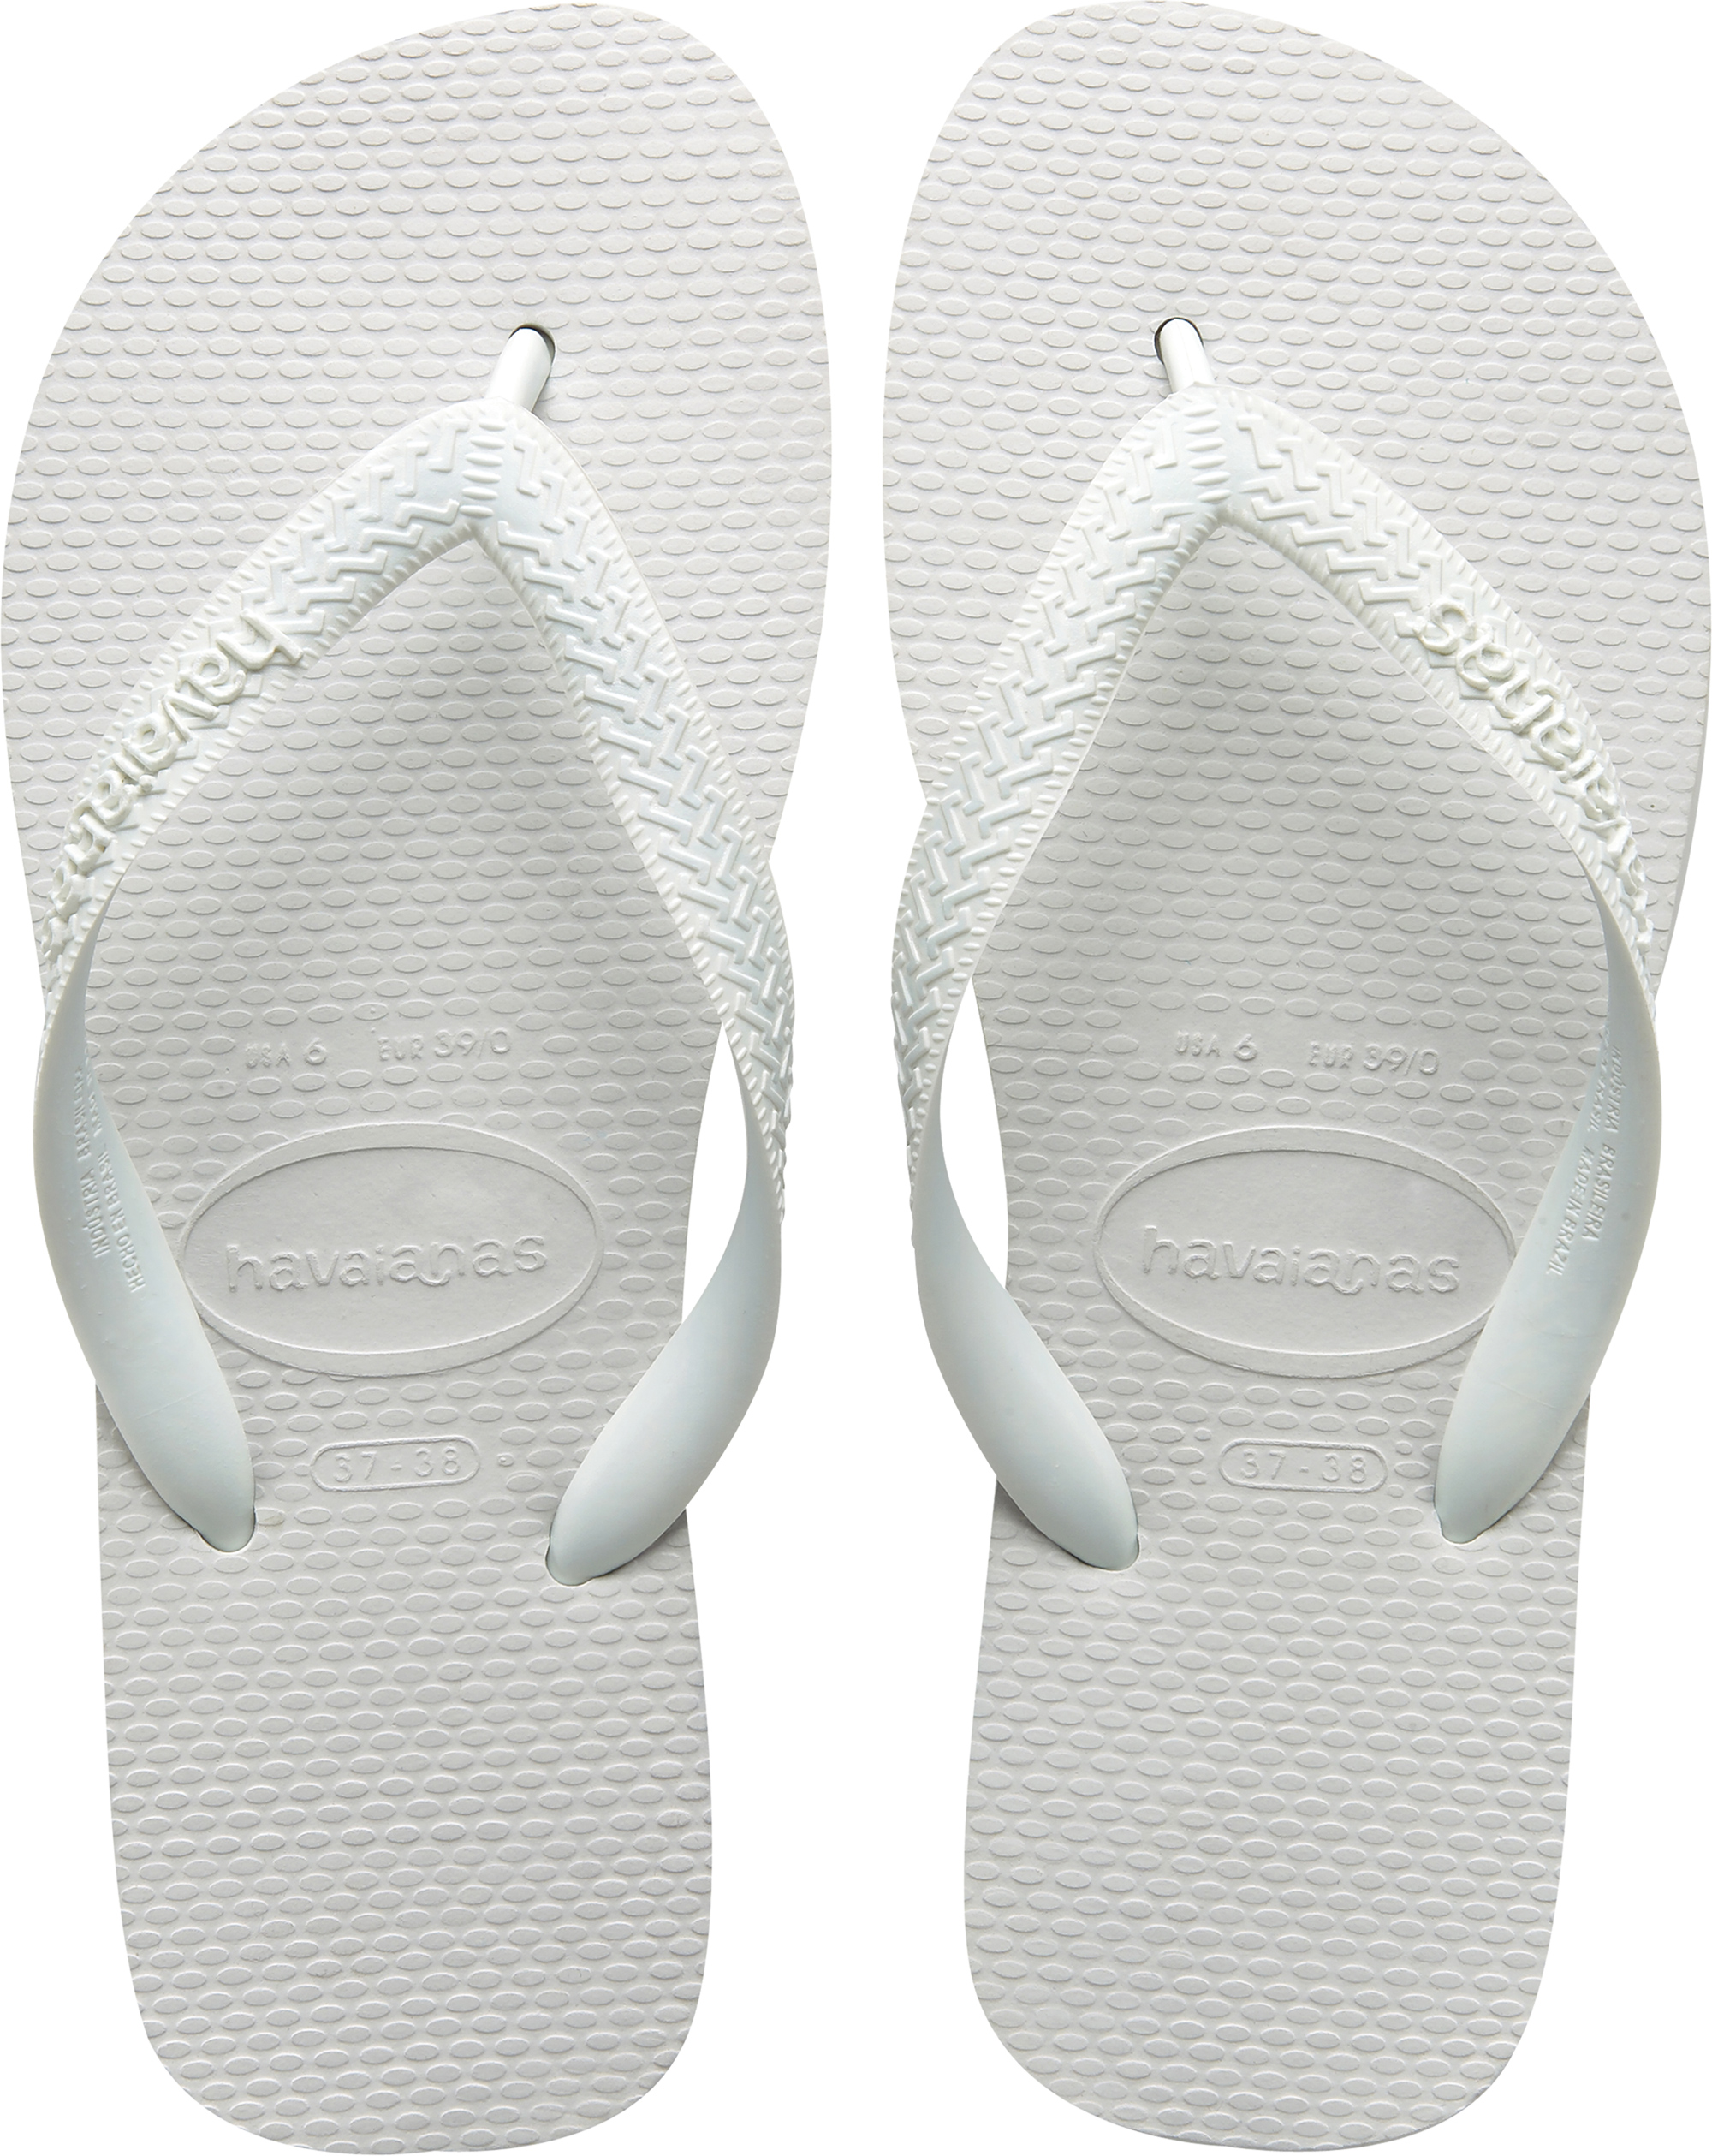 Havaianas Flip Flops and Sandals | UK Stock, Shipped from Cornwall